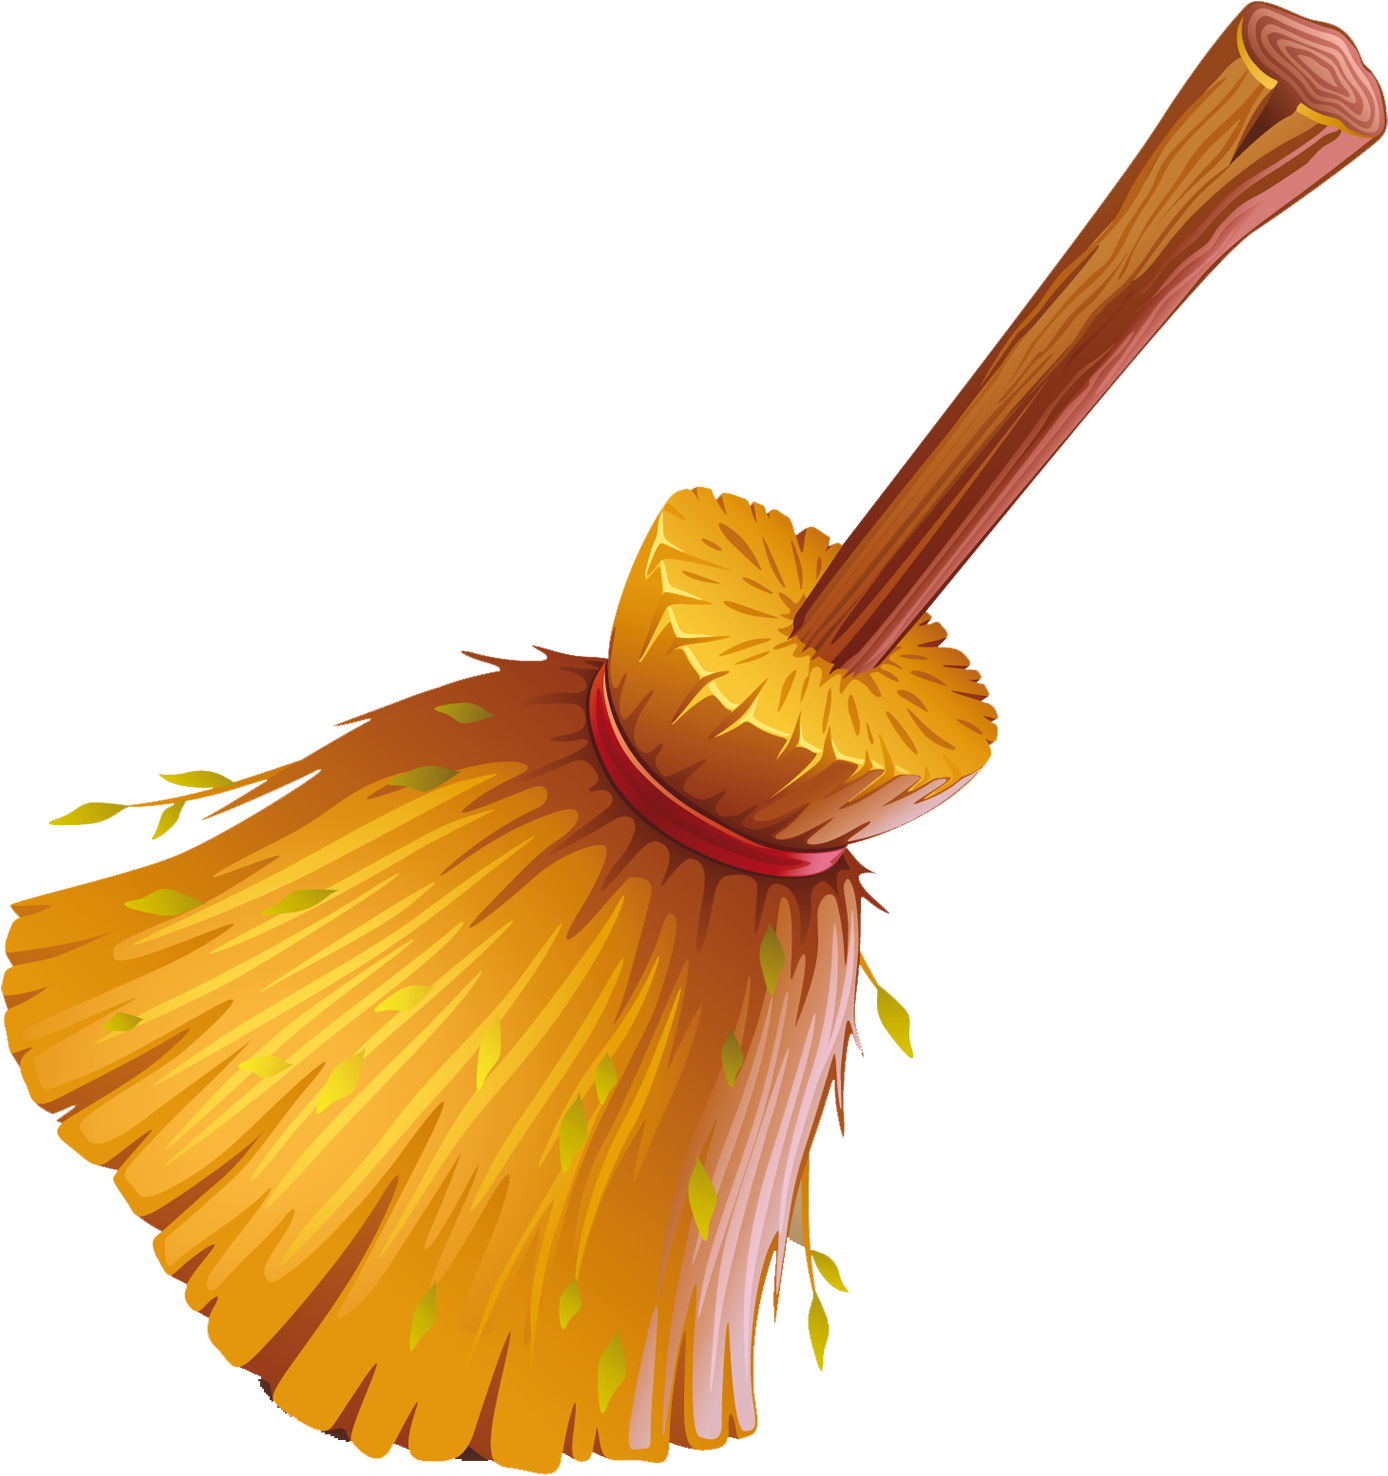 Vintage Broom Vector Free Clipart HQ PNG Image